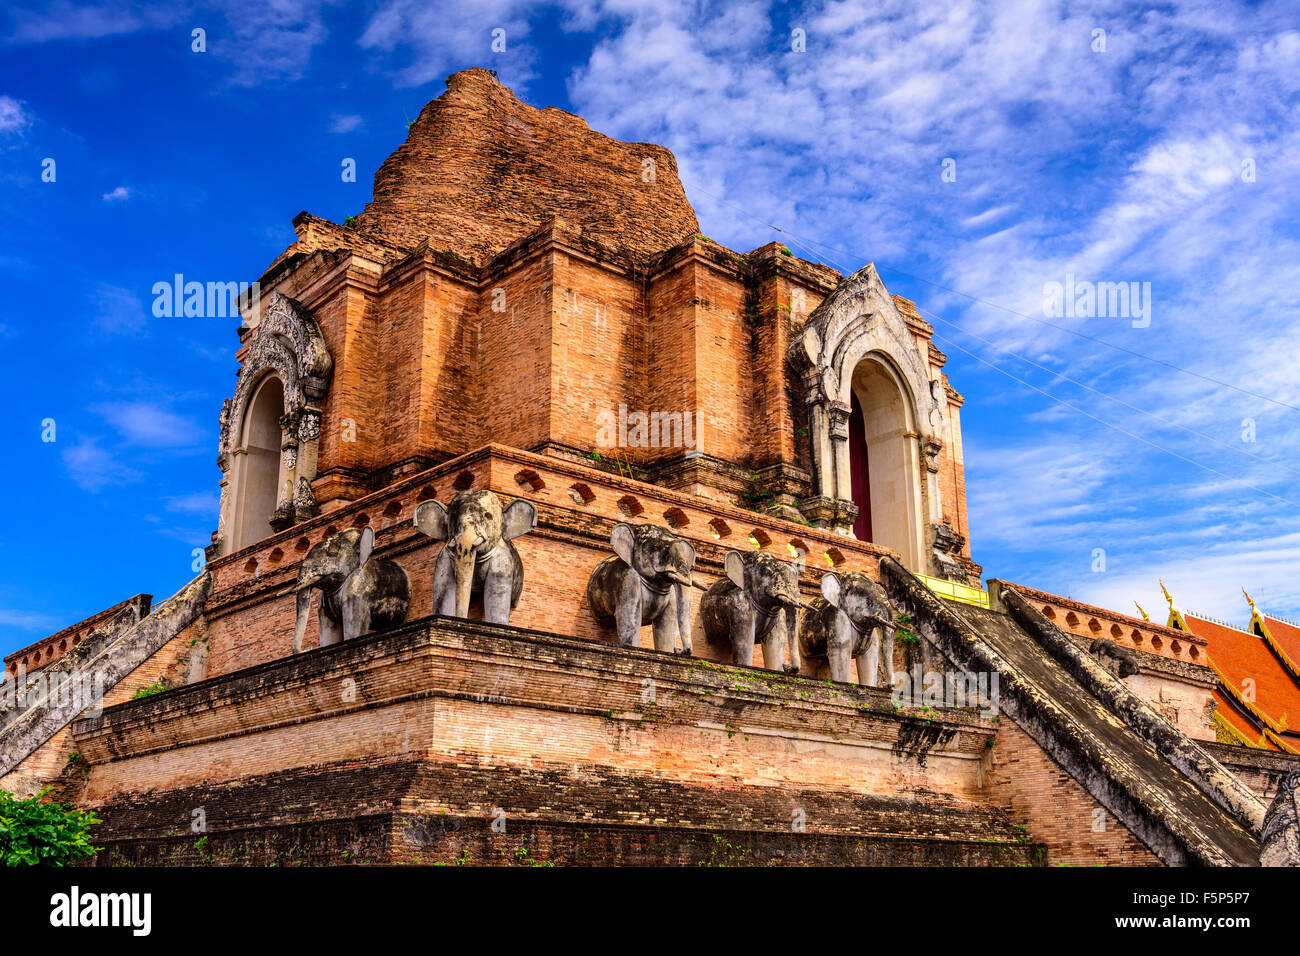 Wat Chedi Luang temple ruins in Chiang Mai, Thailand Stock Photo